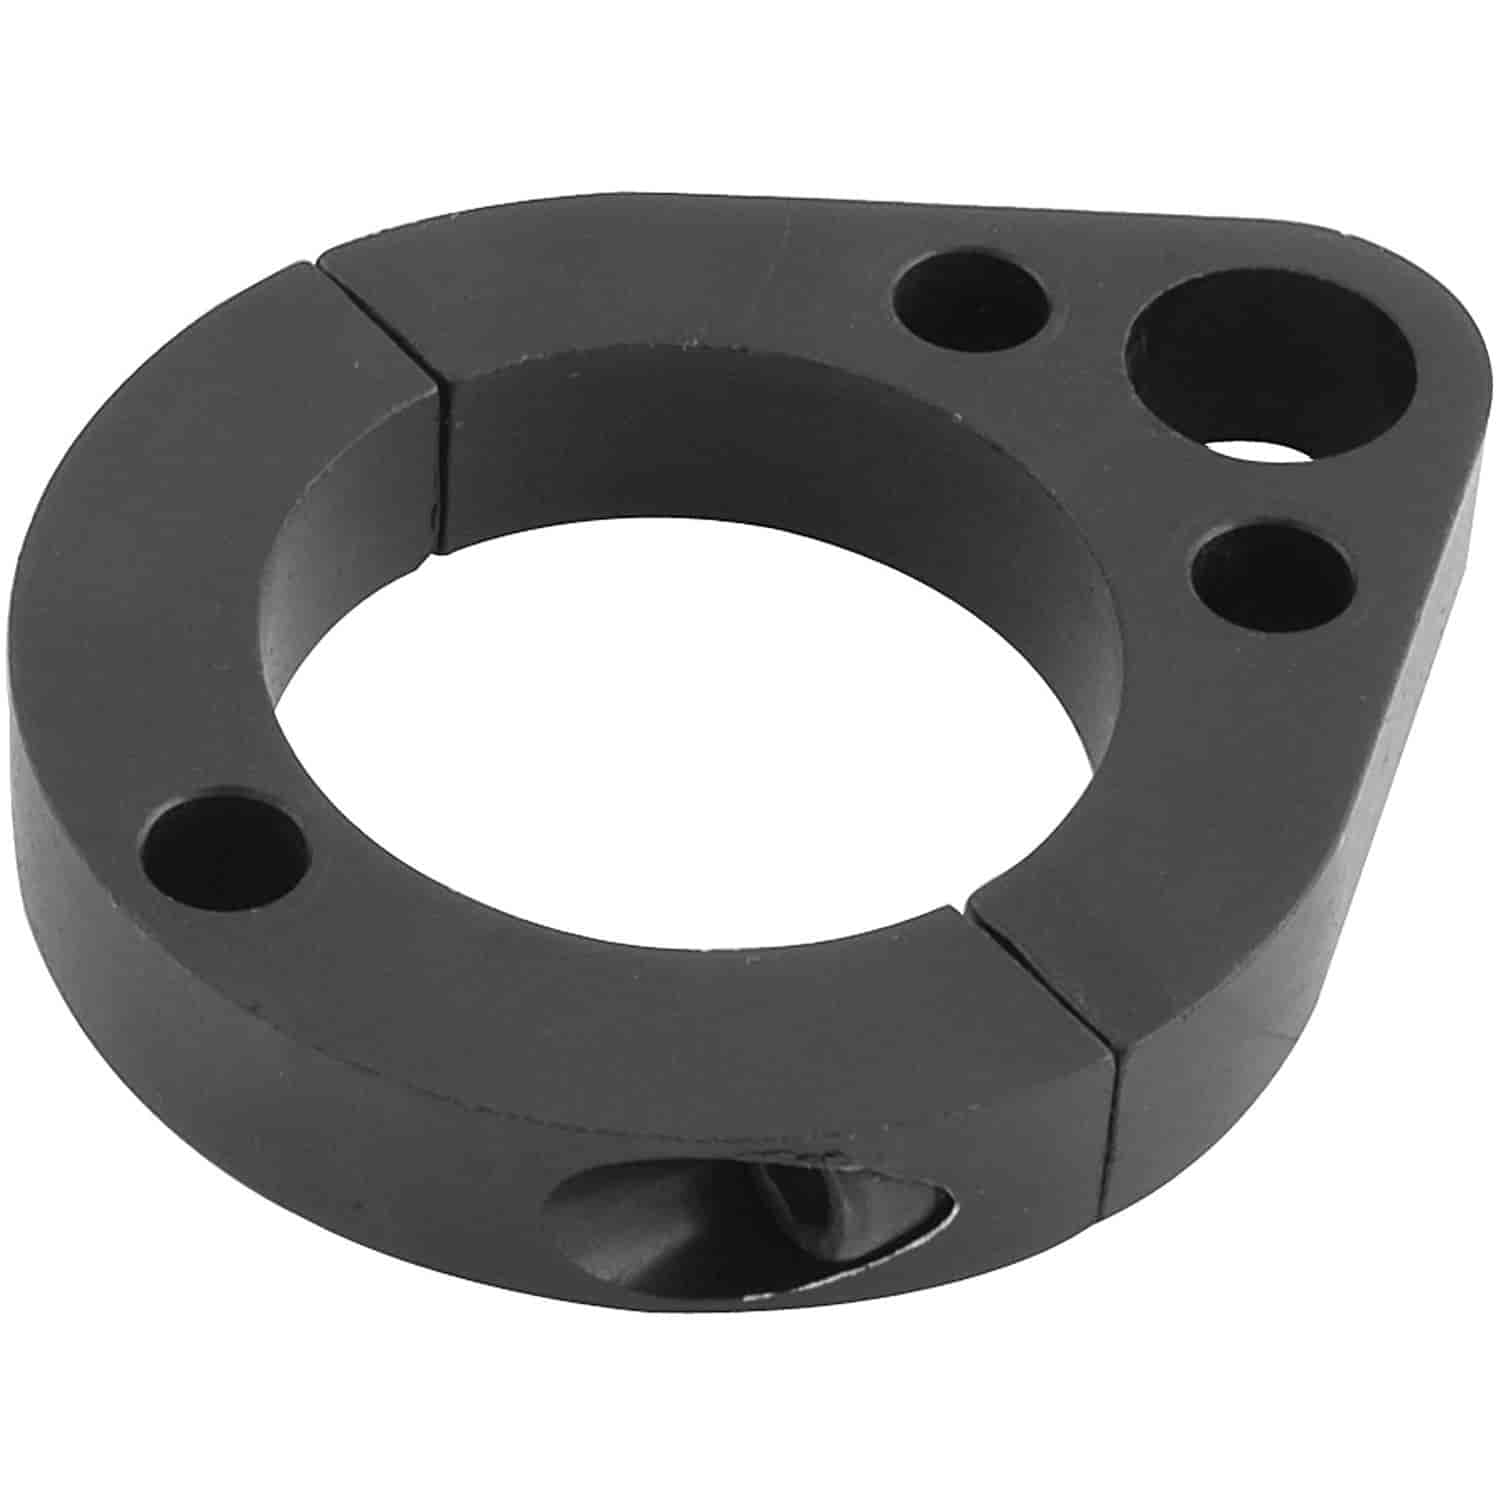 Replacement Clamp-On Bracket 1-1/2" Fixed